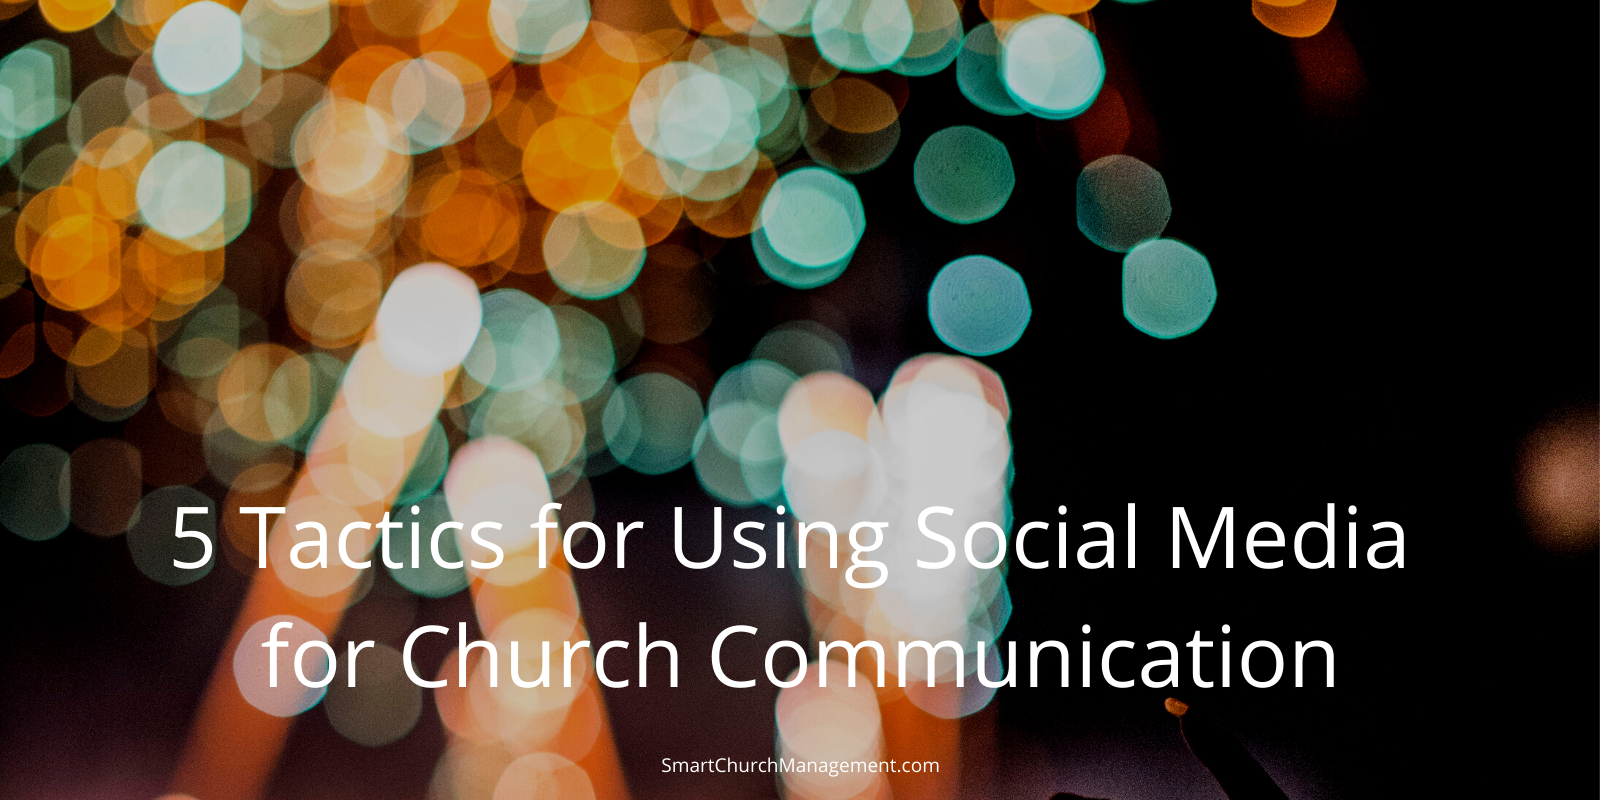 How to use social media in church